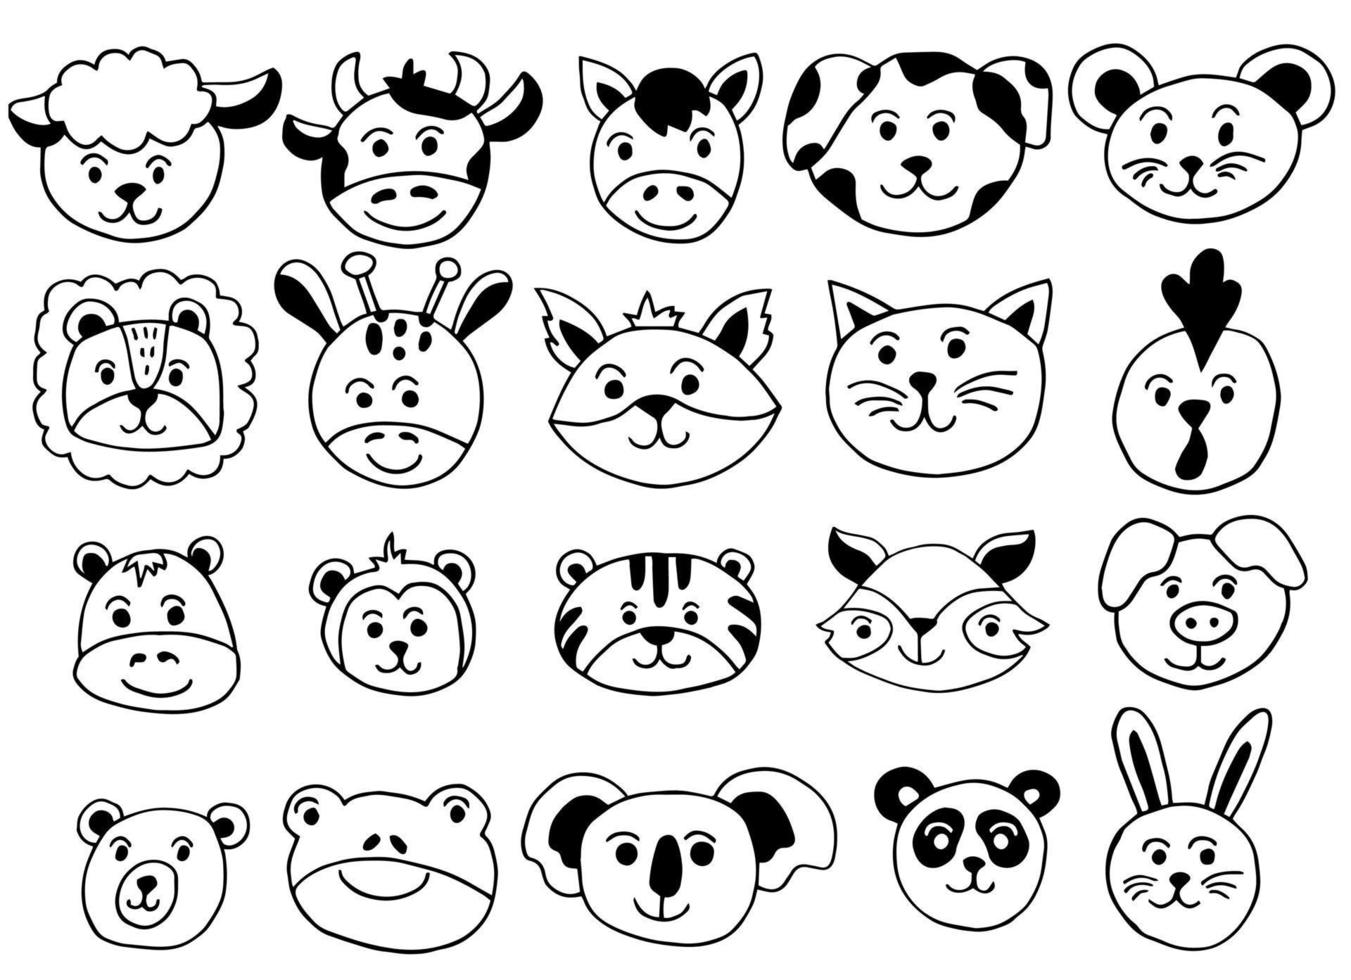 Doodle set illustration of an animal icon. vector